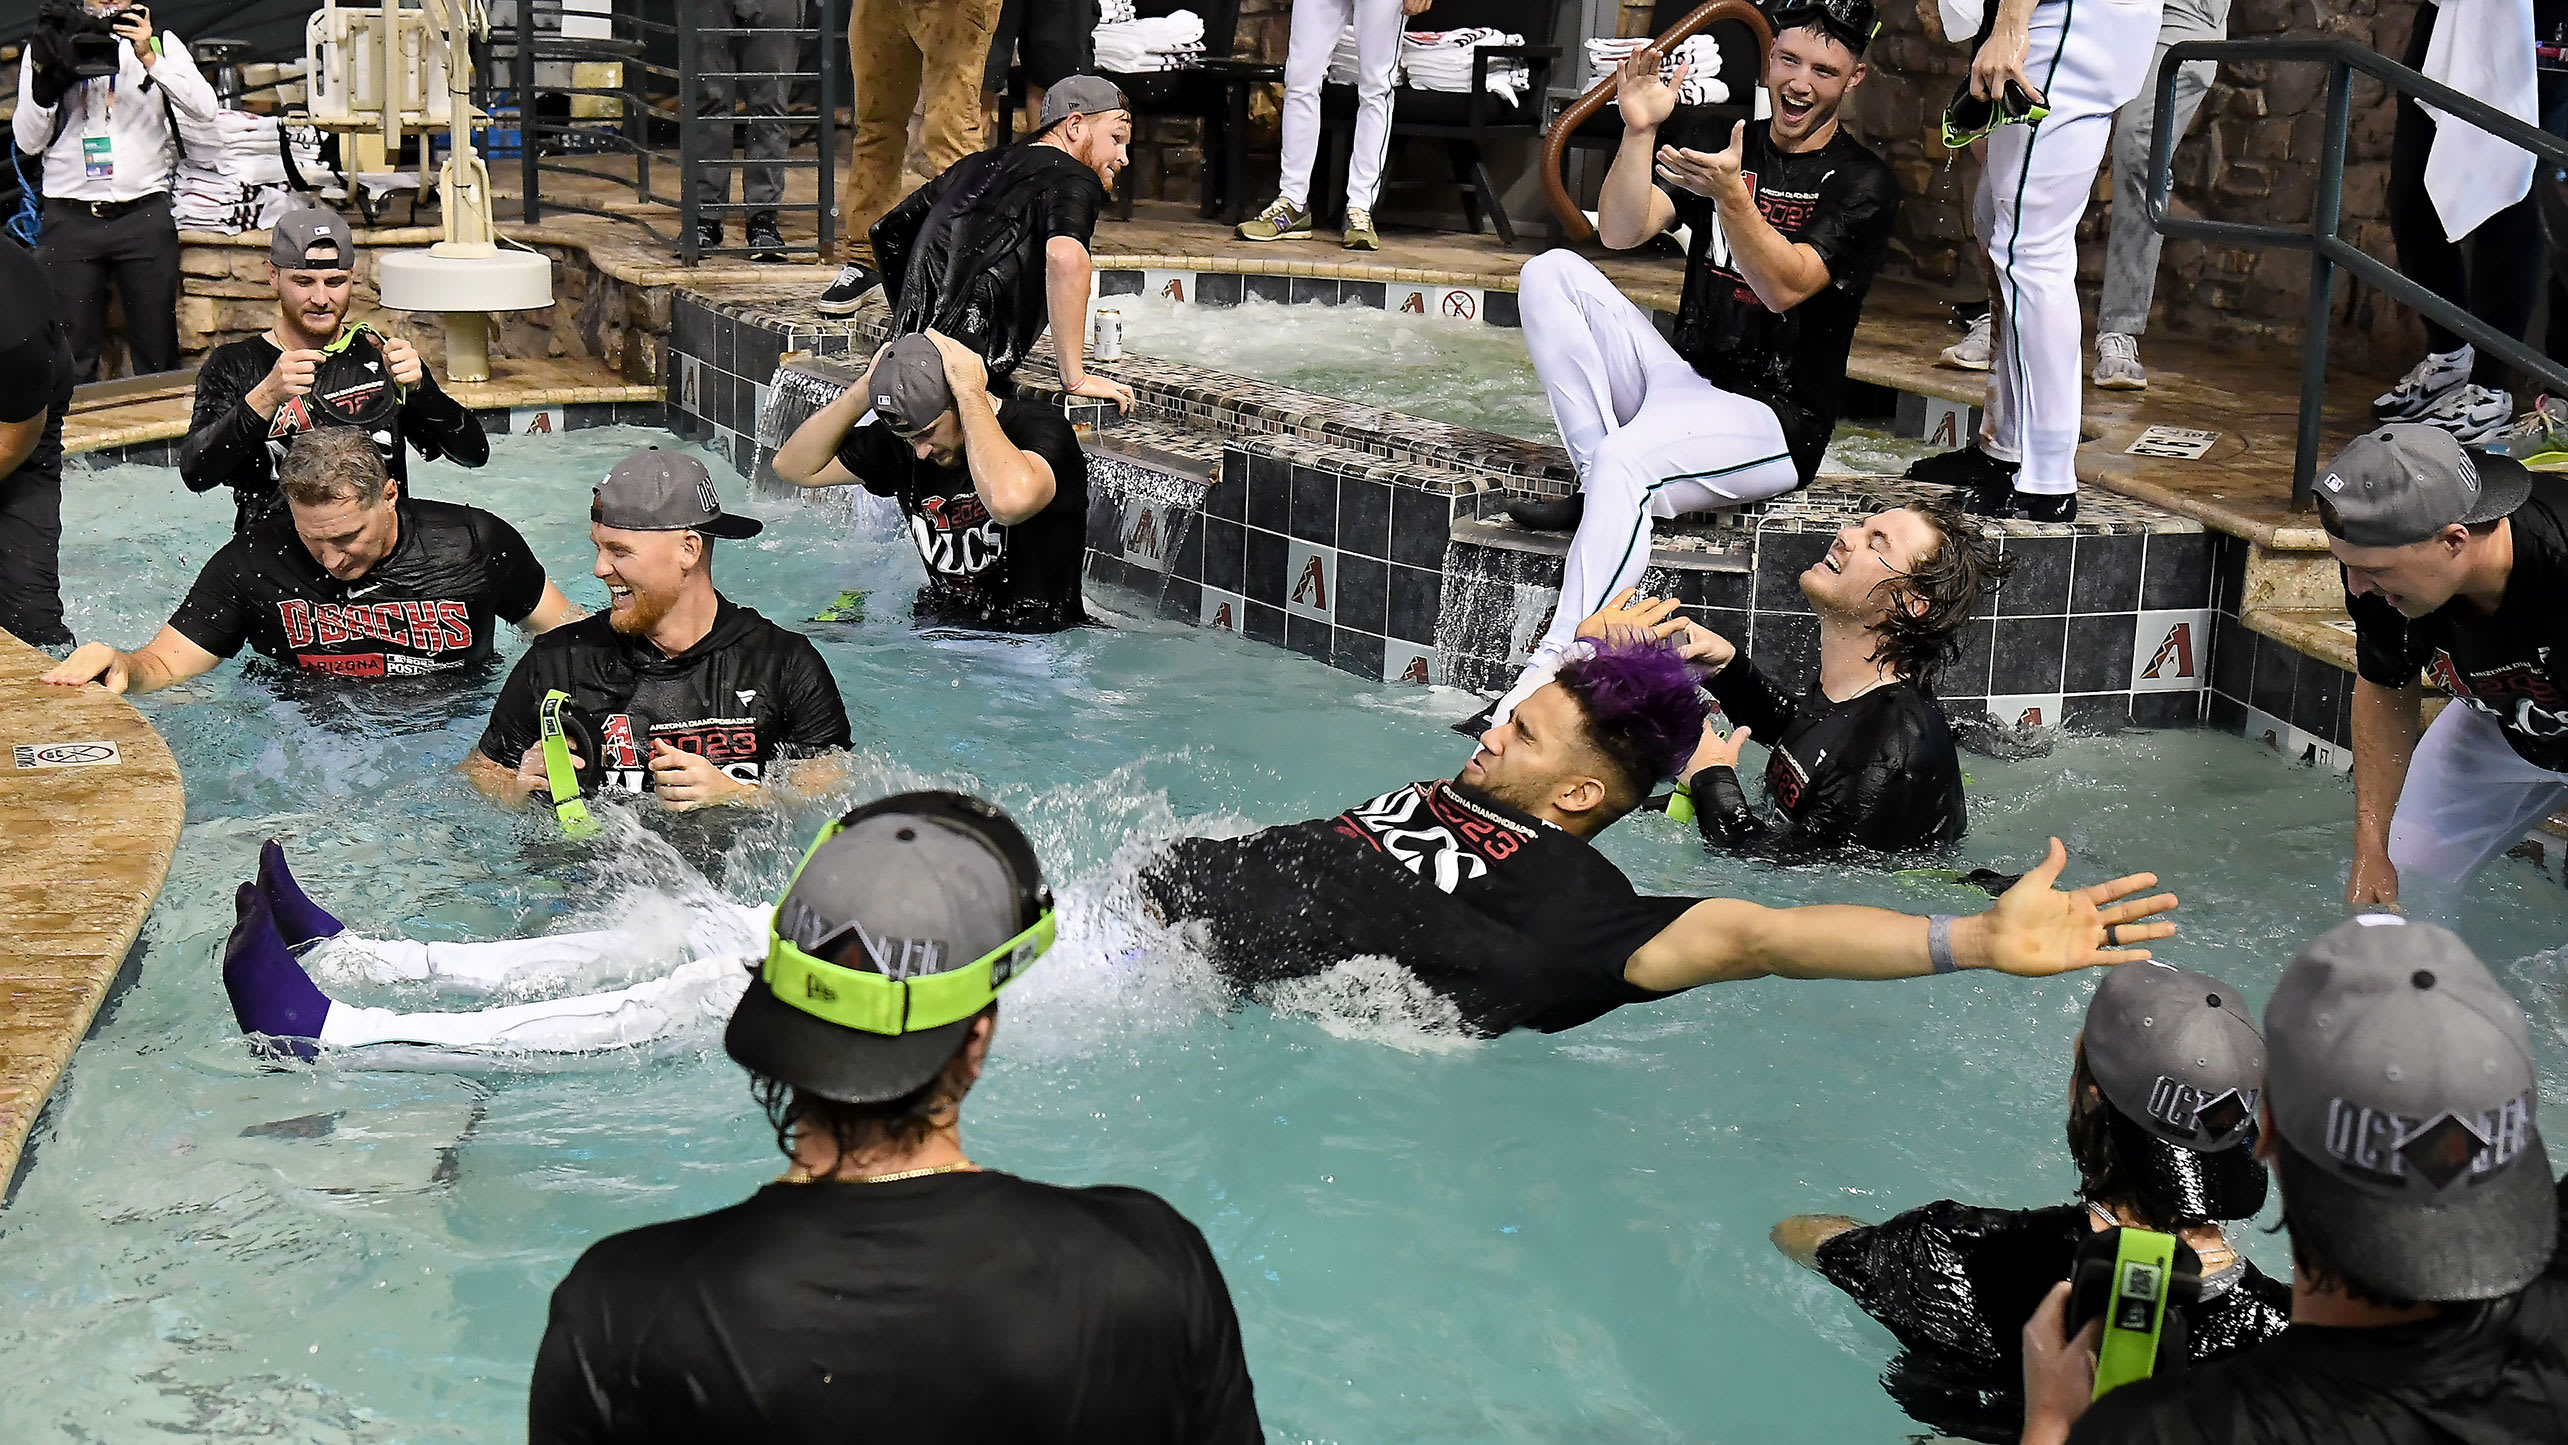 Lourdes Gurriel Jr. falls backwards into the pool at Chase Field as the D-backs celebrate